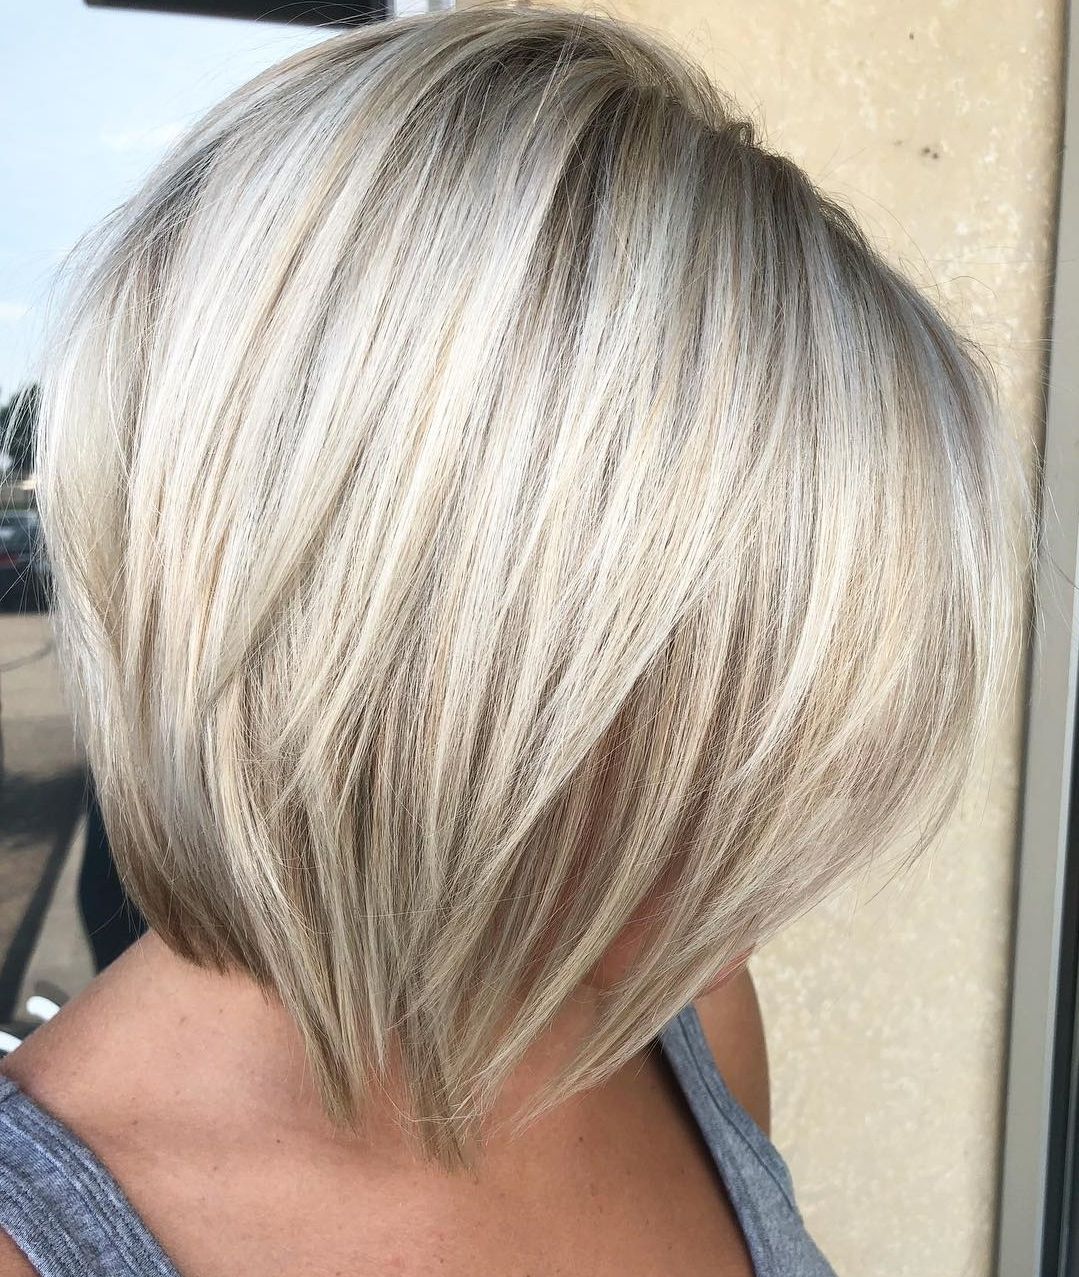 45 Short Hairstyles For Fine Hair To Rock In 2019 For Current Straight Graded Haircuts With Layering (View 15 of 20)